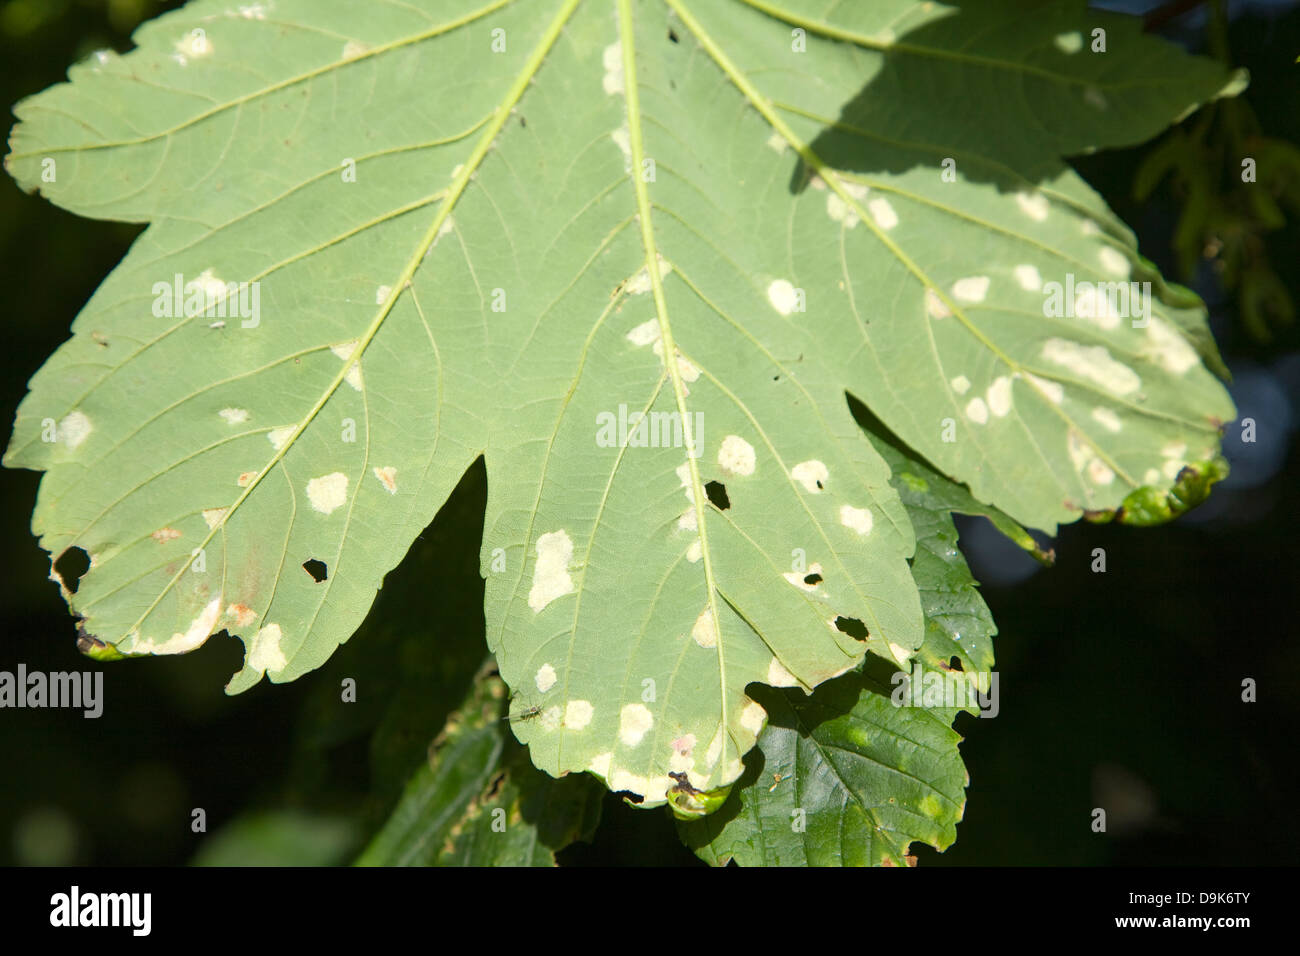 Blotched patches on sycamore tree leaf caused by erineum galls - the work of Eriophyes mites Stock Photo